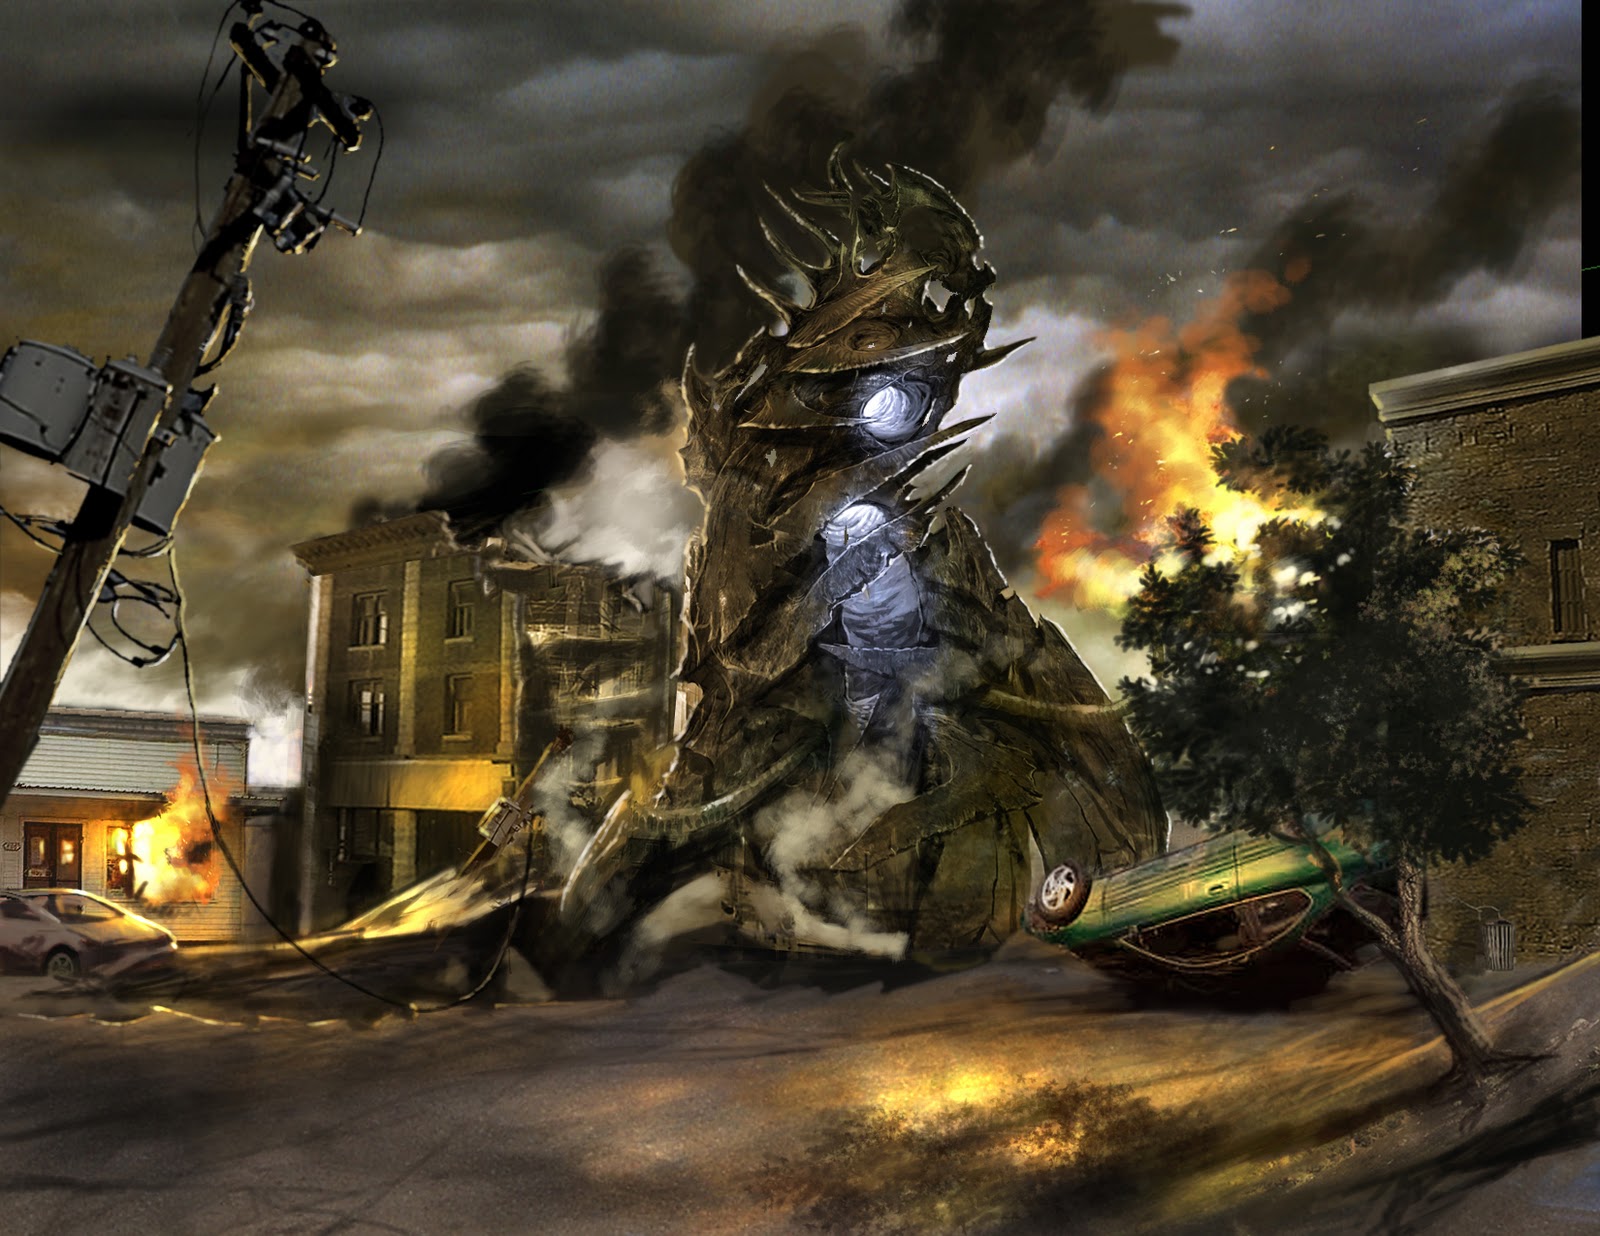 destruction wallpaper,action adventure game,strategy video game,pc game,cg artwork,games